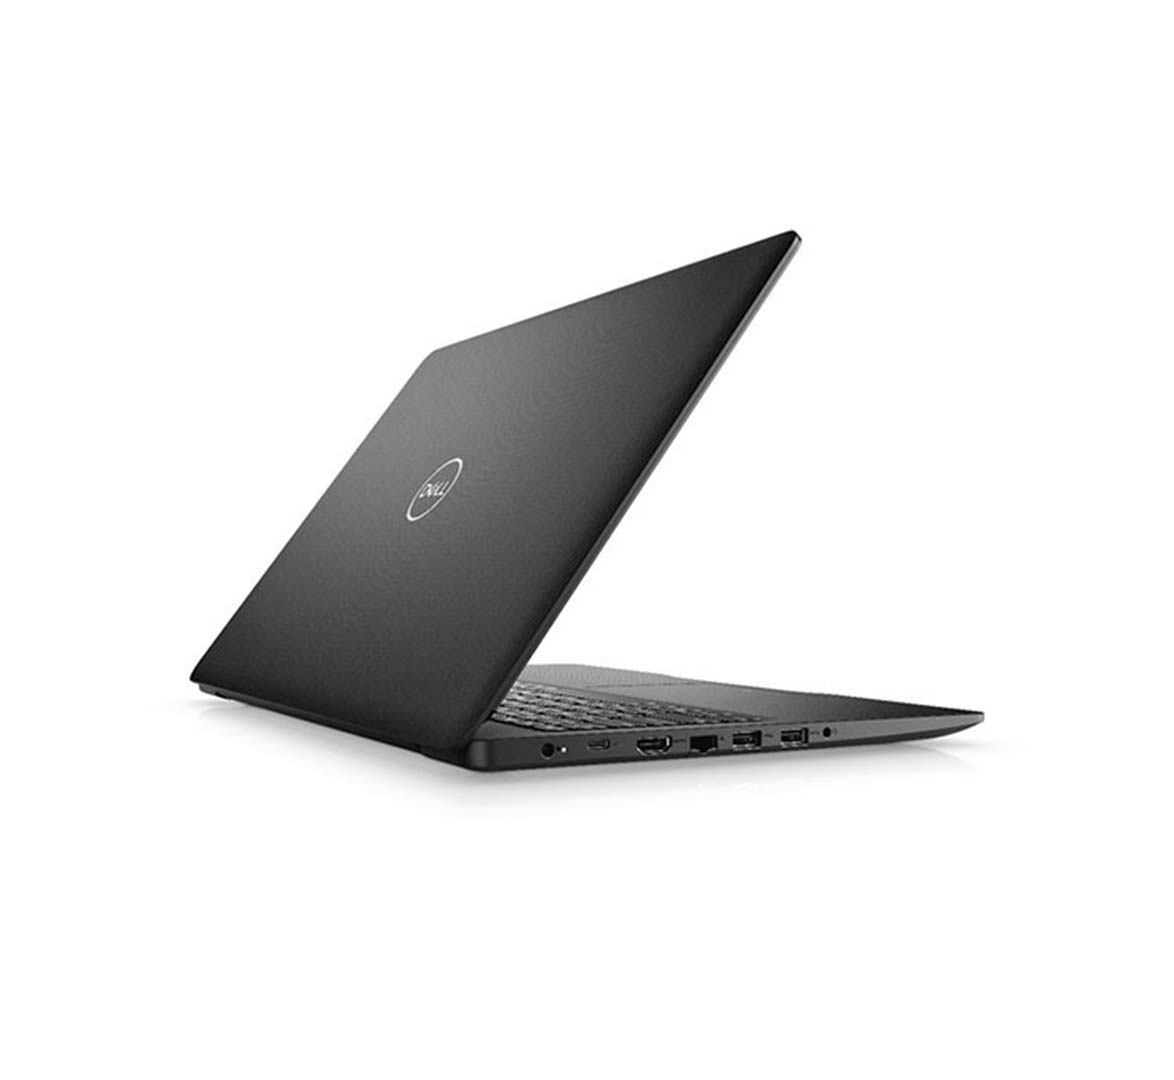 Dell Inspiron 3593 Business Laptop, Intel Core i5-10th Generation CPU, 8GB RAM, 256GB SSD , 15.4 inch Display